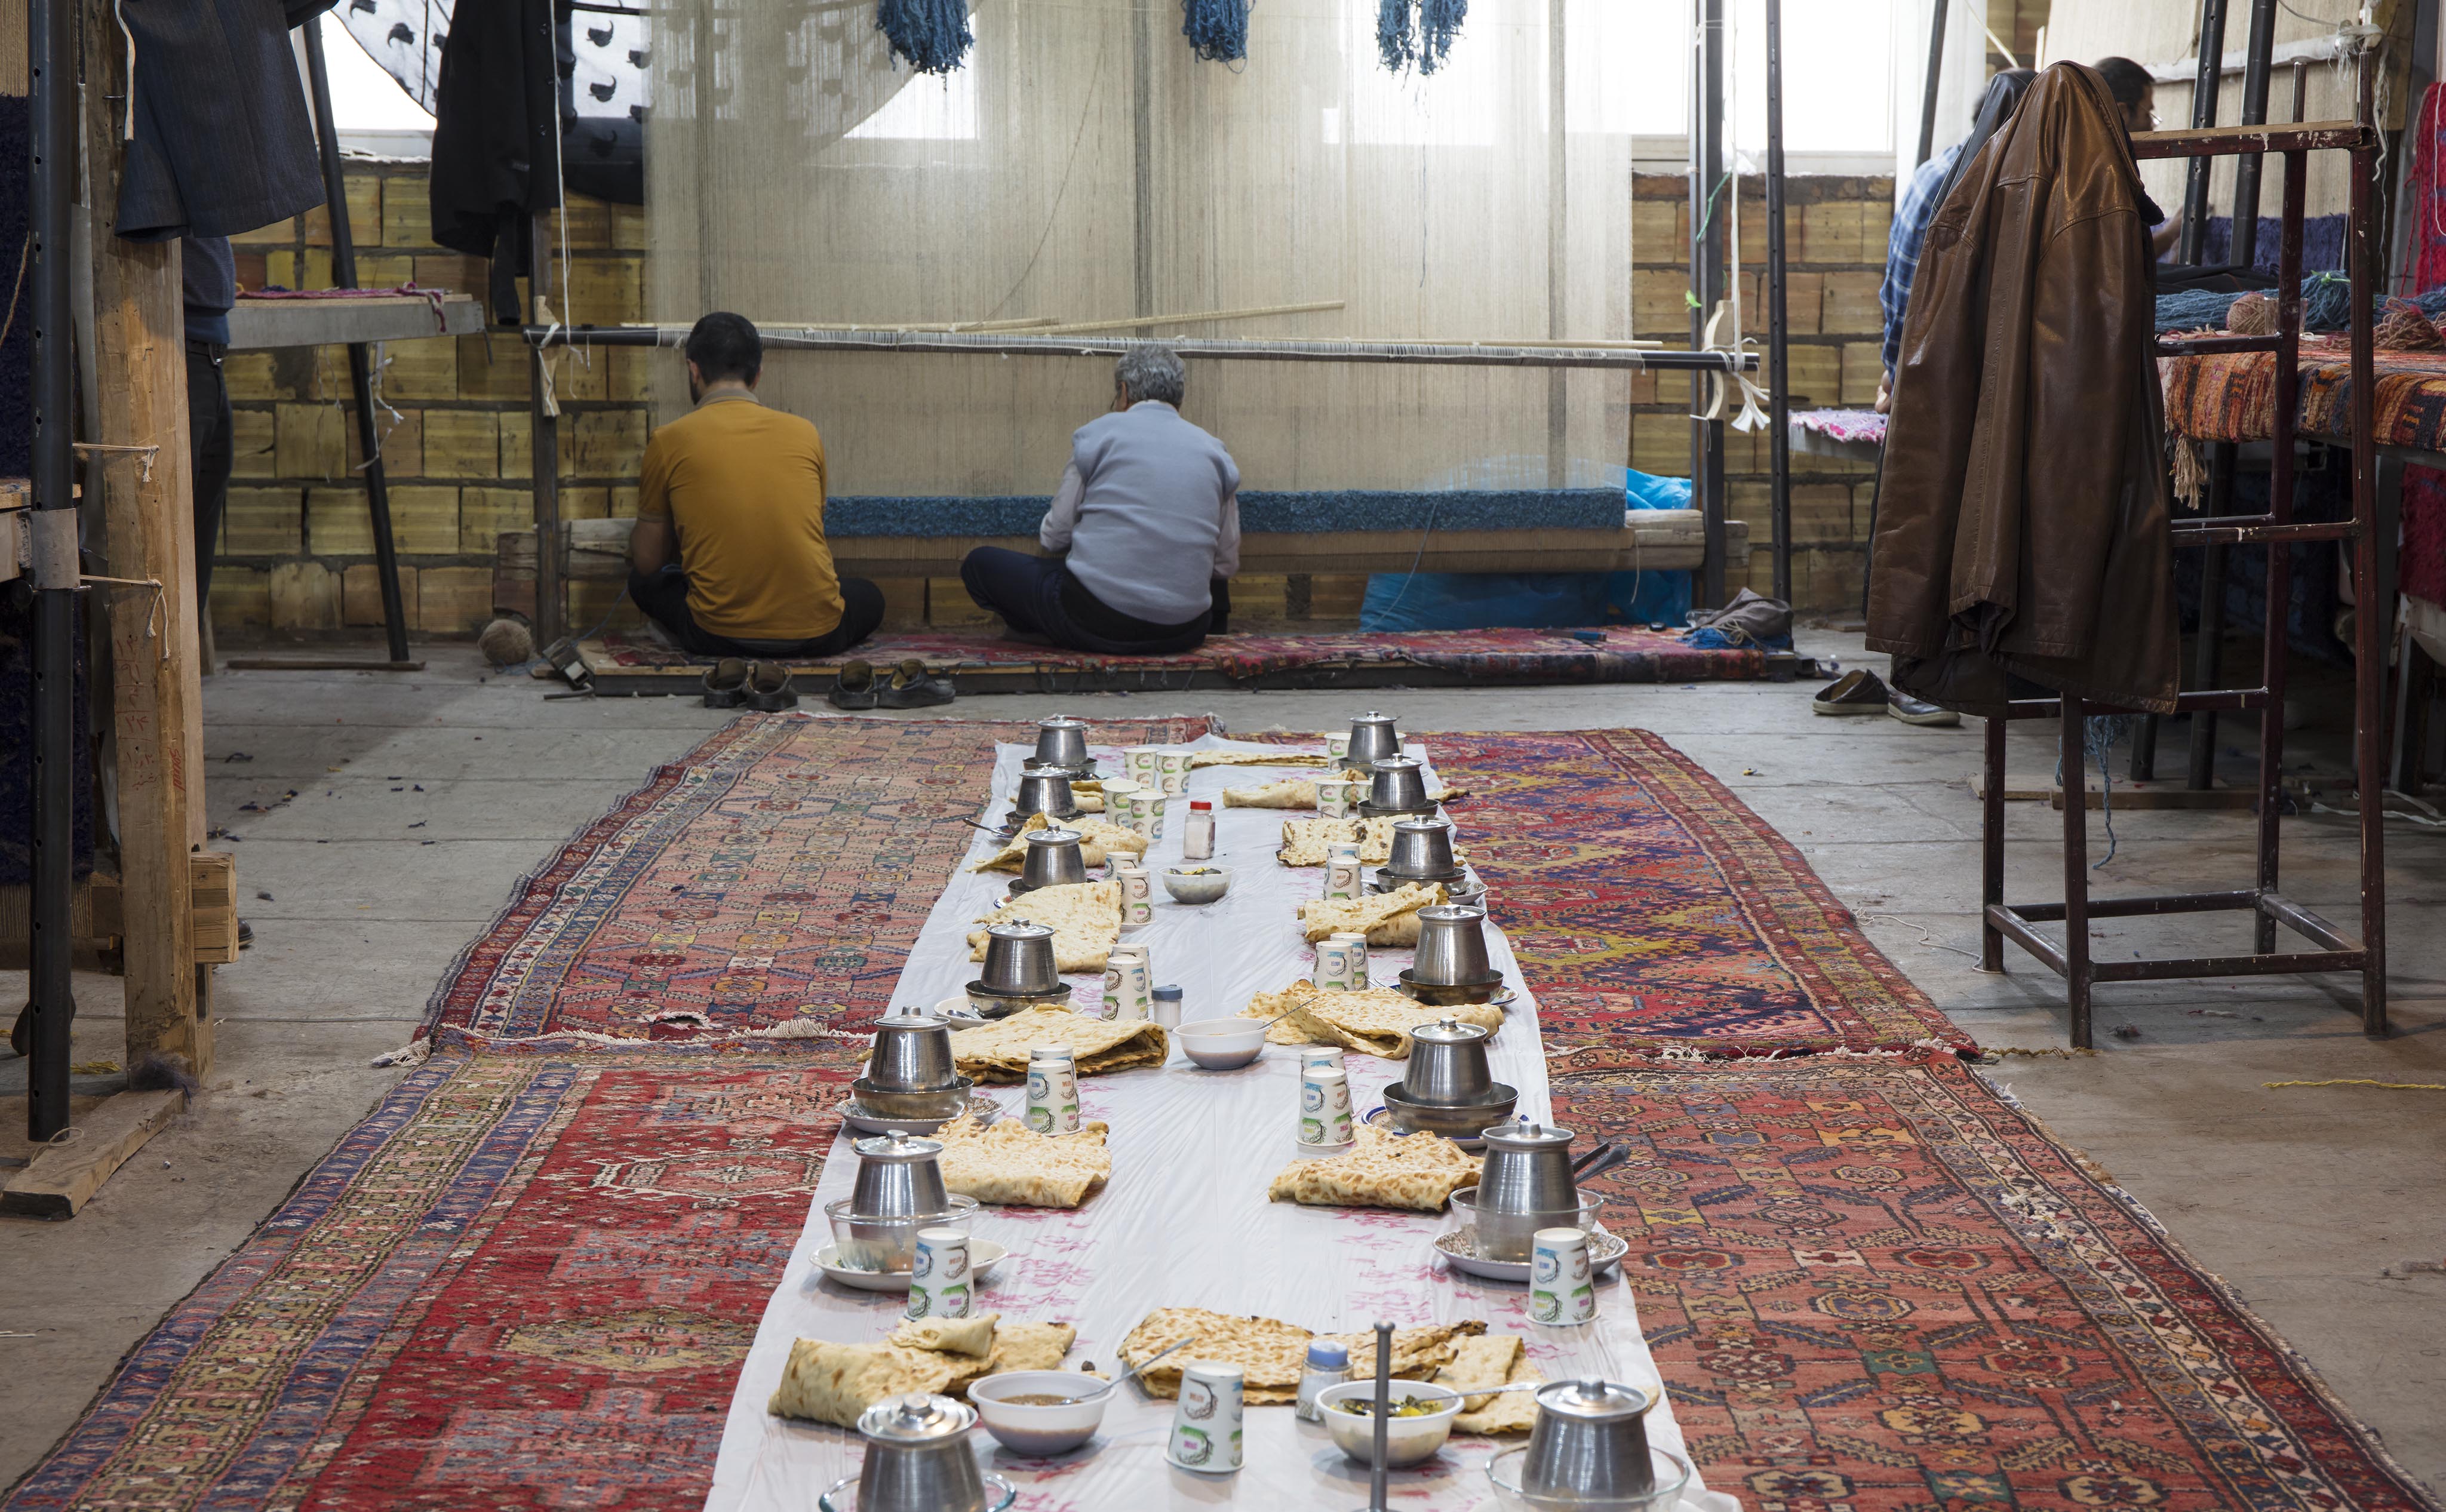 As tradition dictates, before the first carpet of the 'Silence Azerbaijan Collection' could be loomed a feast was prepared. | Image courtesy of Nasser Nishaburi.